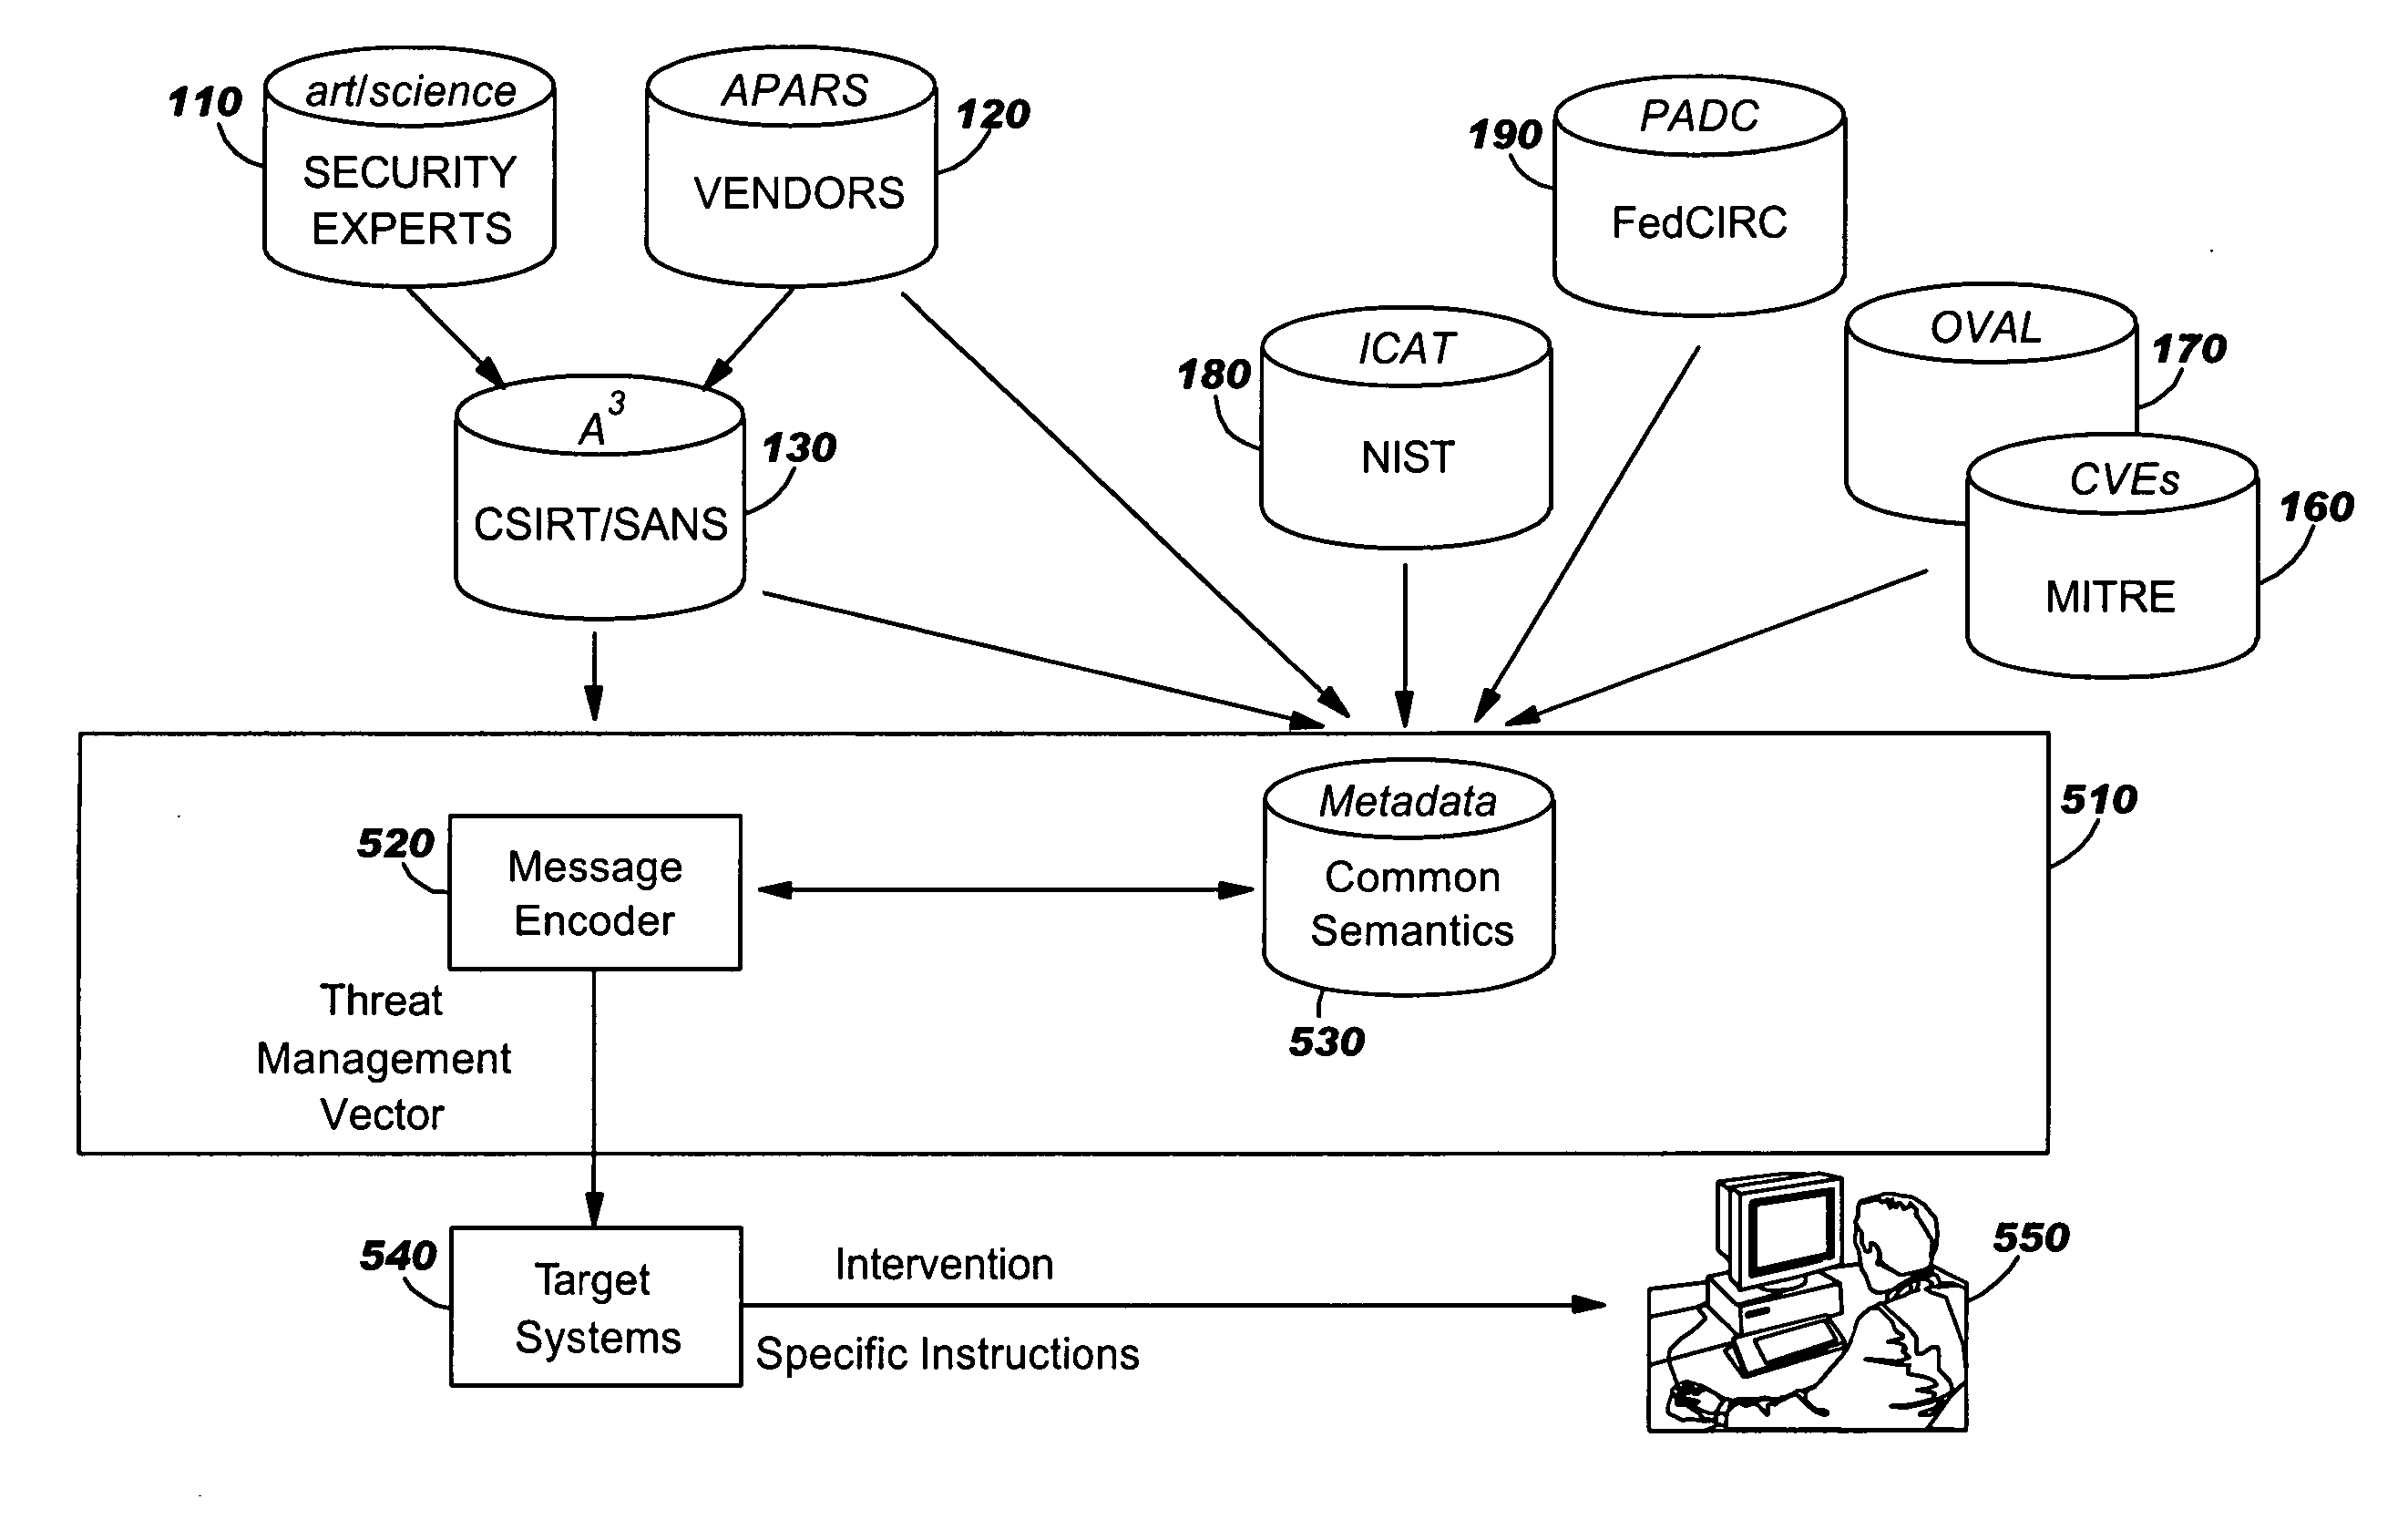 Domain controlling systems, methods and computer program products for administration of computer security threat countermeasures to a domain of target computer systems